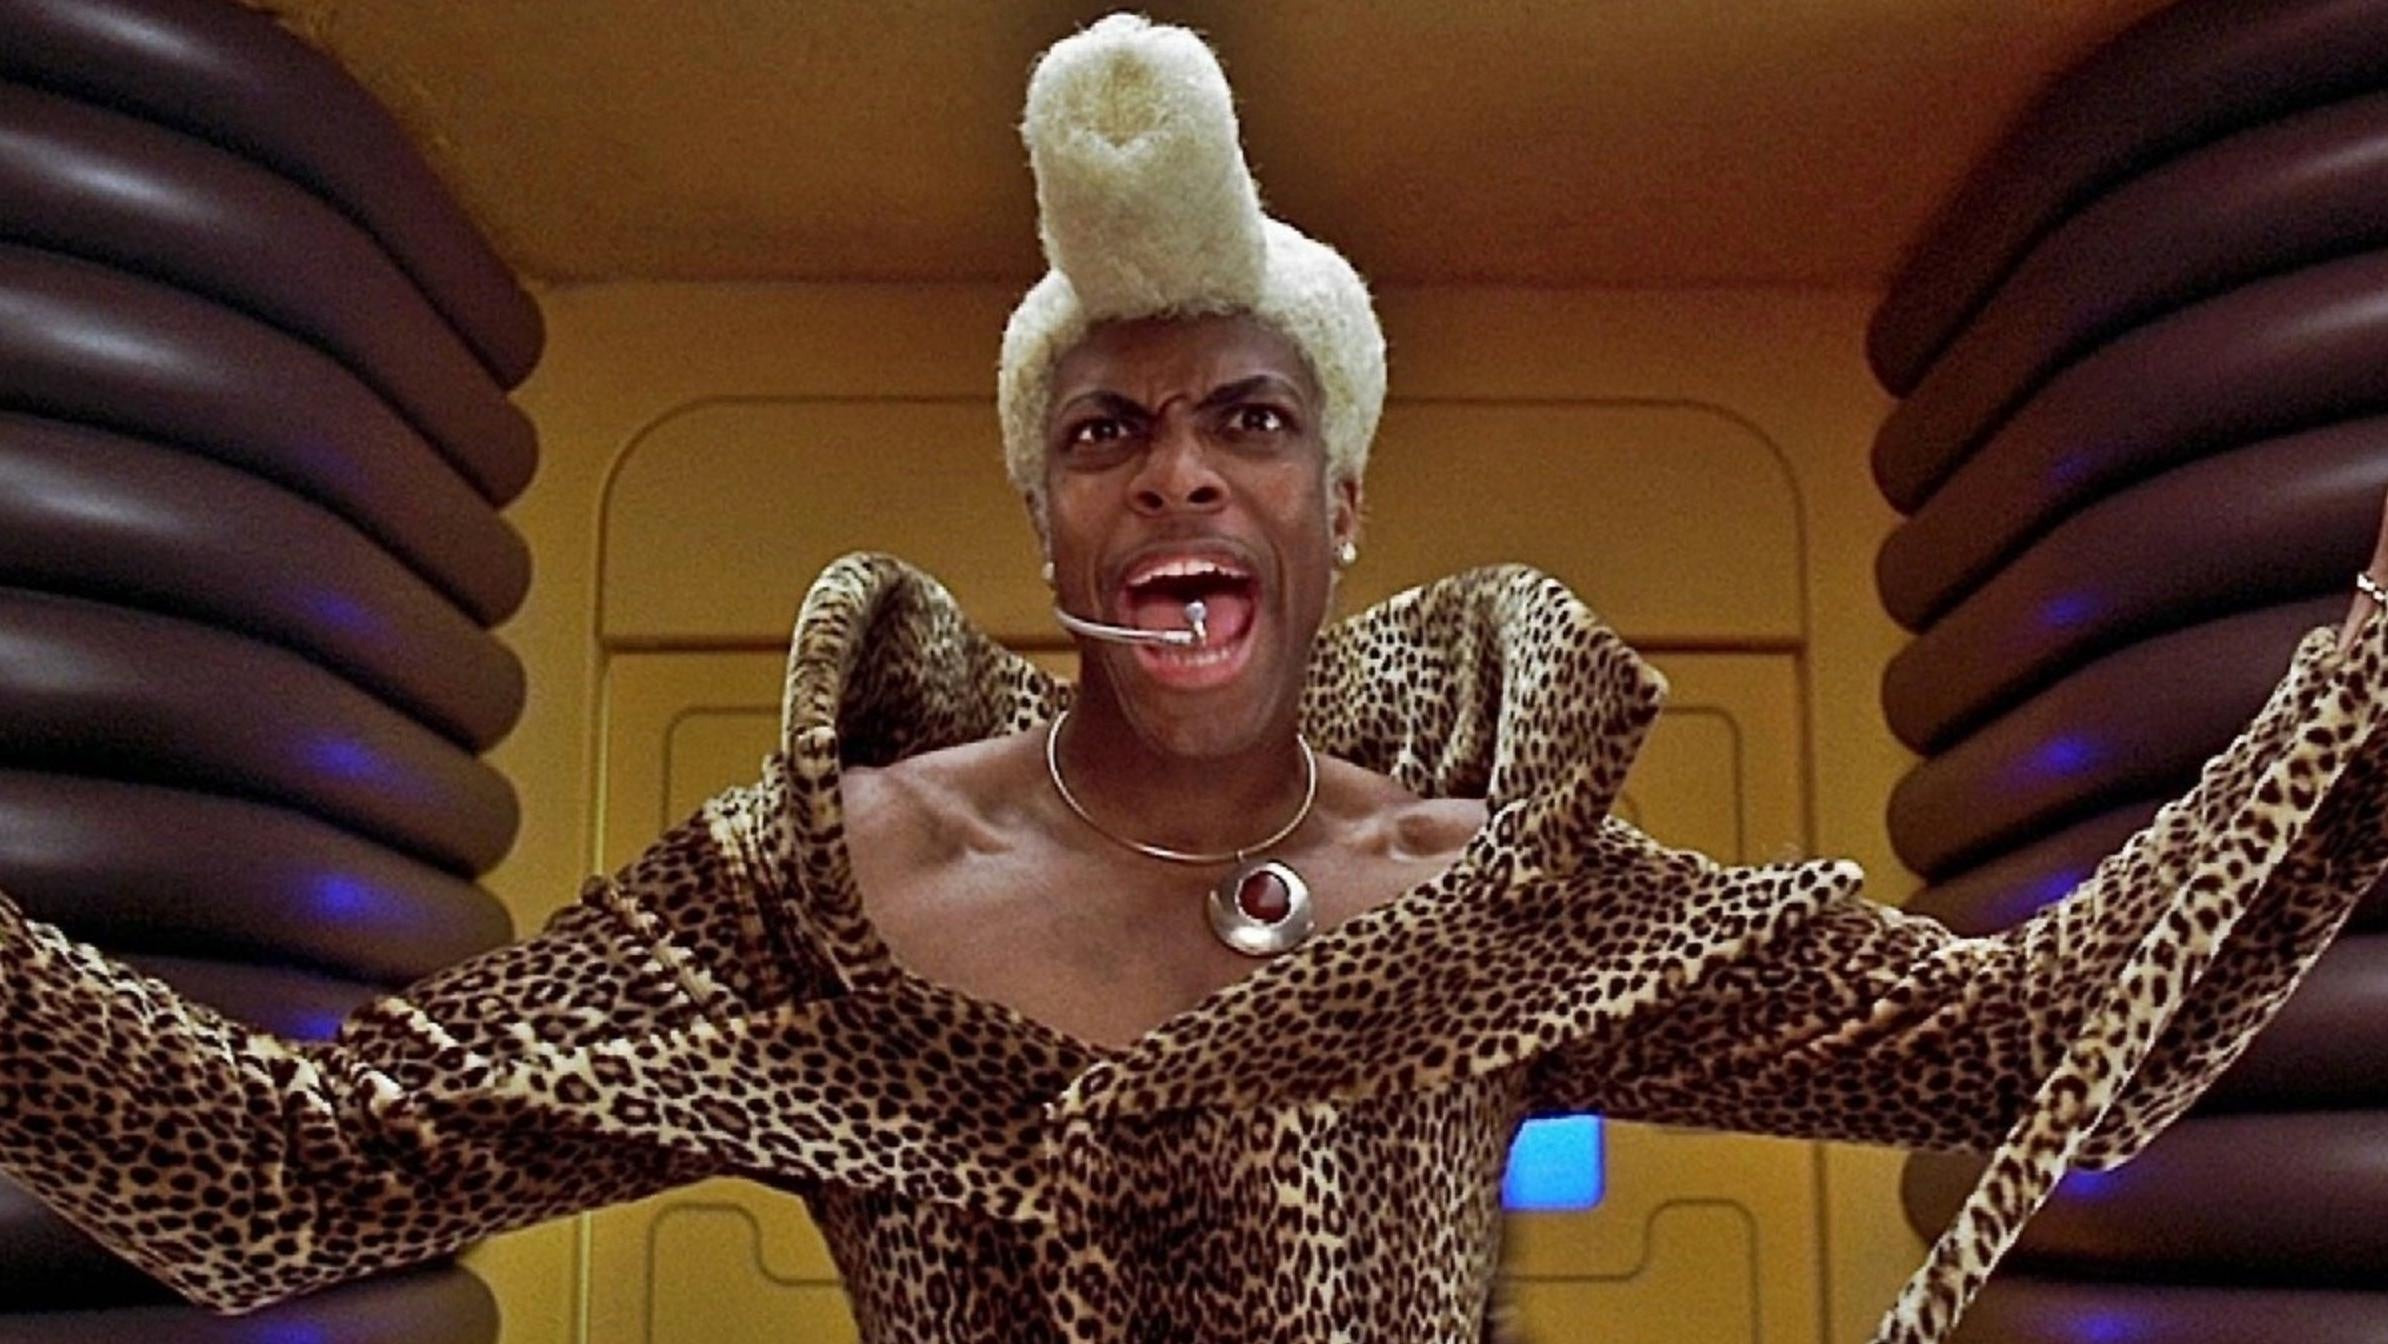 Chris Tucker as Ruby Rhod in The Fifth Element. (Image: Sony Pictures)